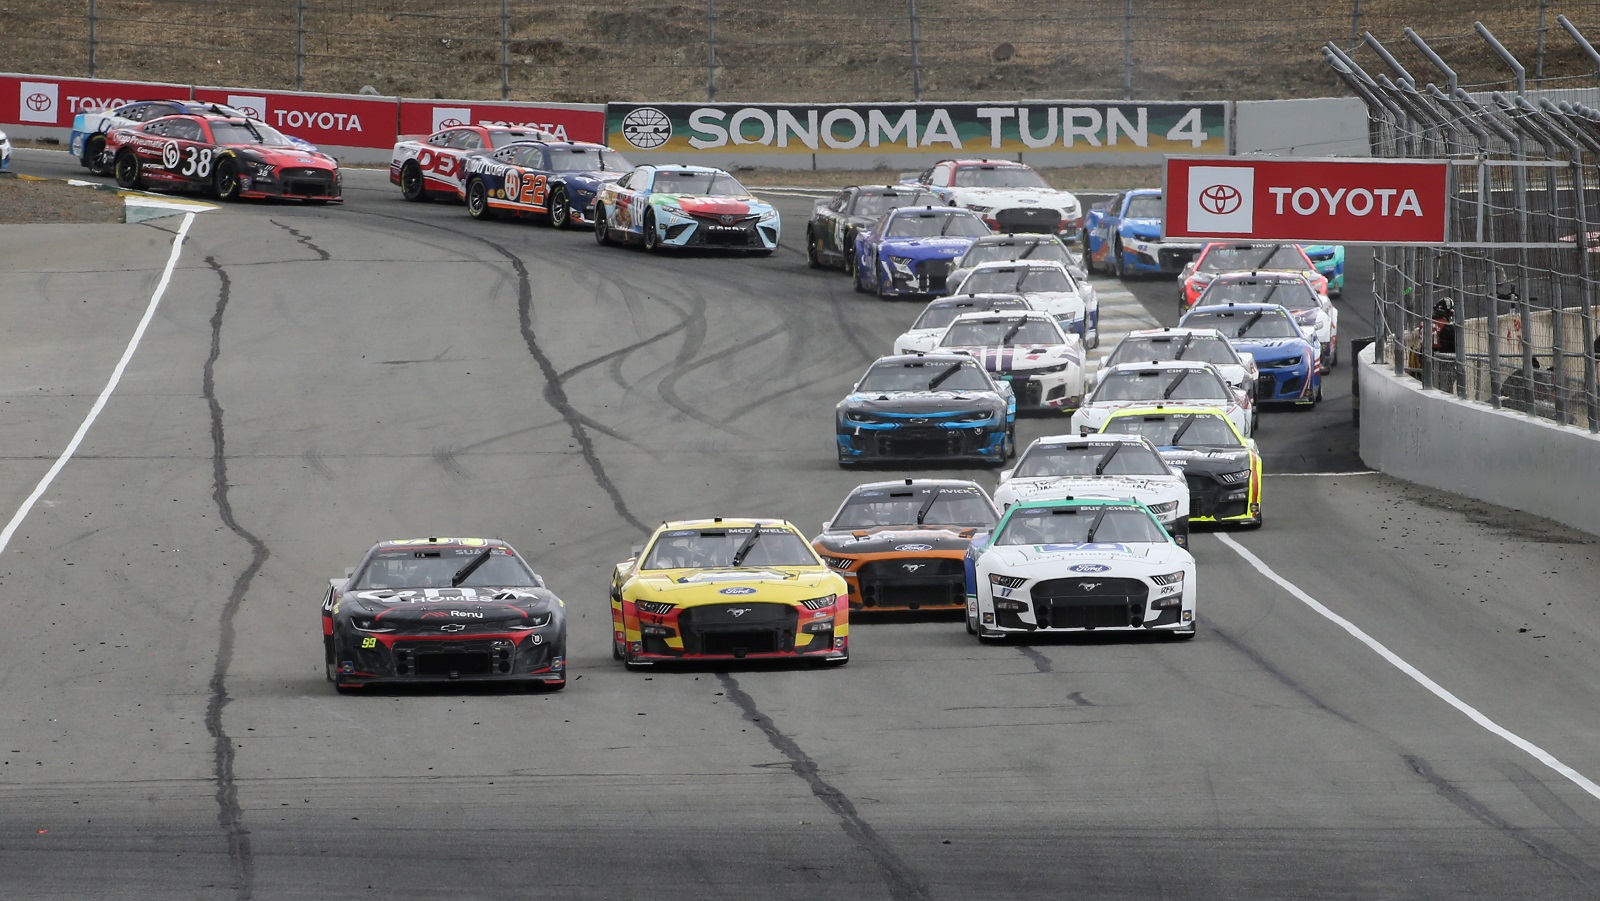 Daniel Suarez leads the field during the NASCAR Cup Series Toyota/Save Mart 350 on June 12, 2022 at Sonoma Raceway. | Matthew Bolt/Icon Sportswire via Getty Images